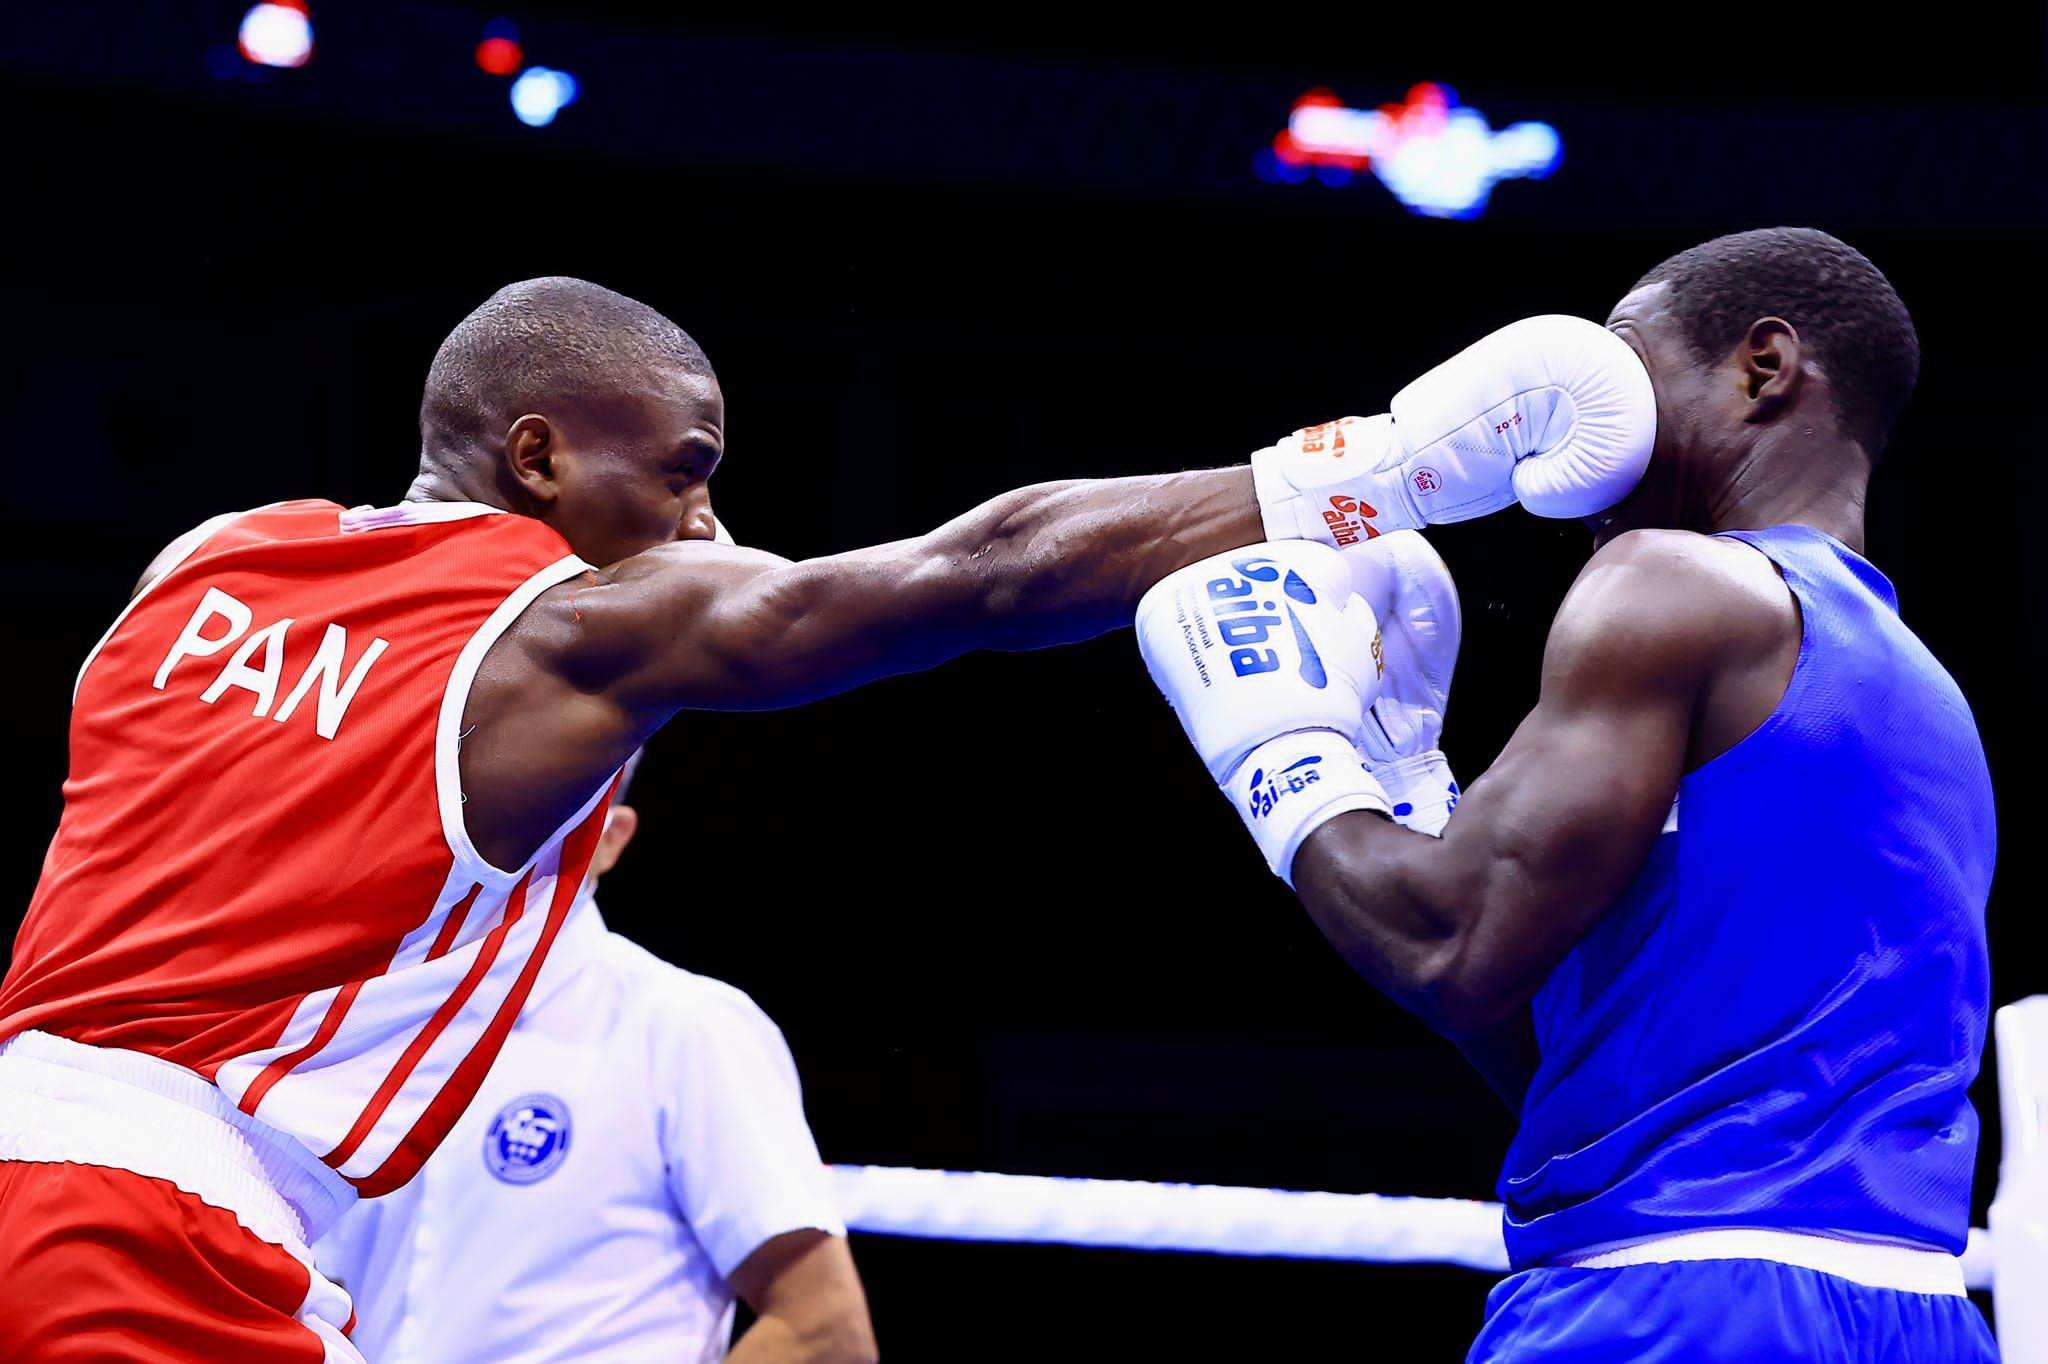 Panama's Eduardo Beckford Chambers was in control against Mohamed Sillah of Sierra Leone in the under-71kg ©AIBA